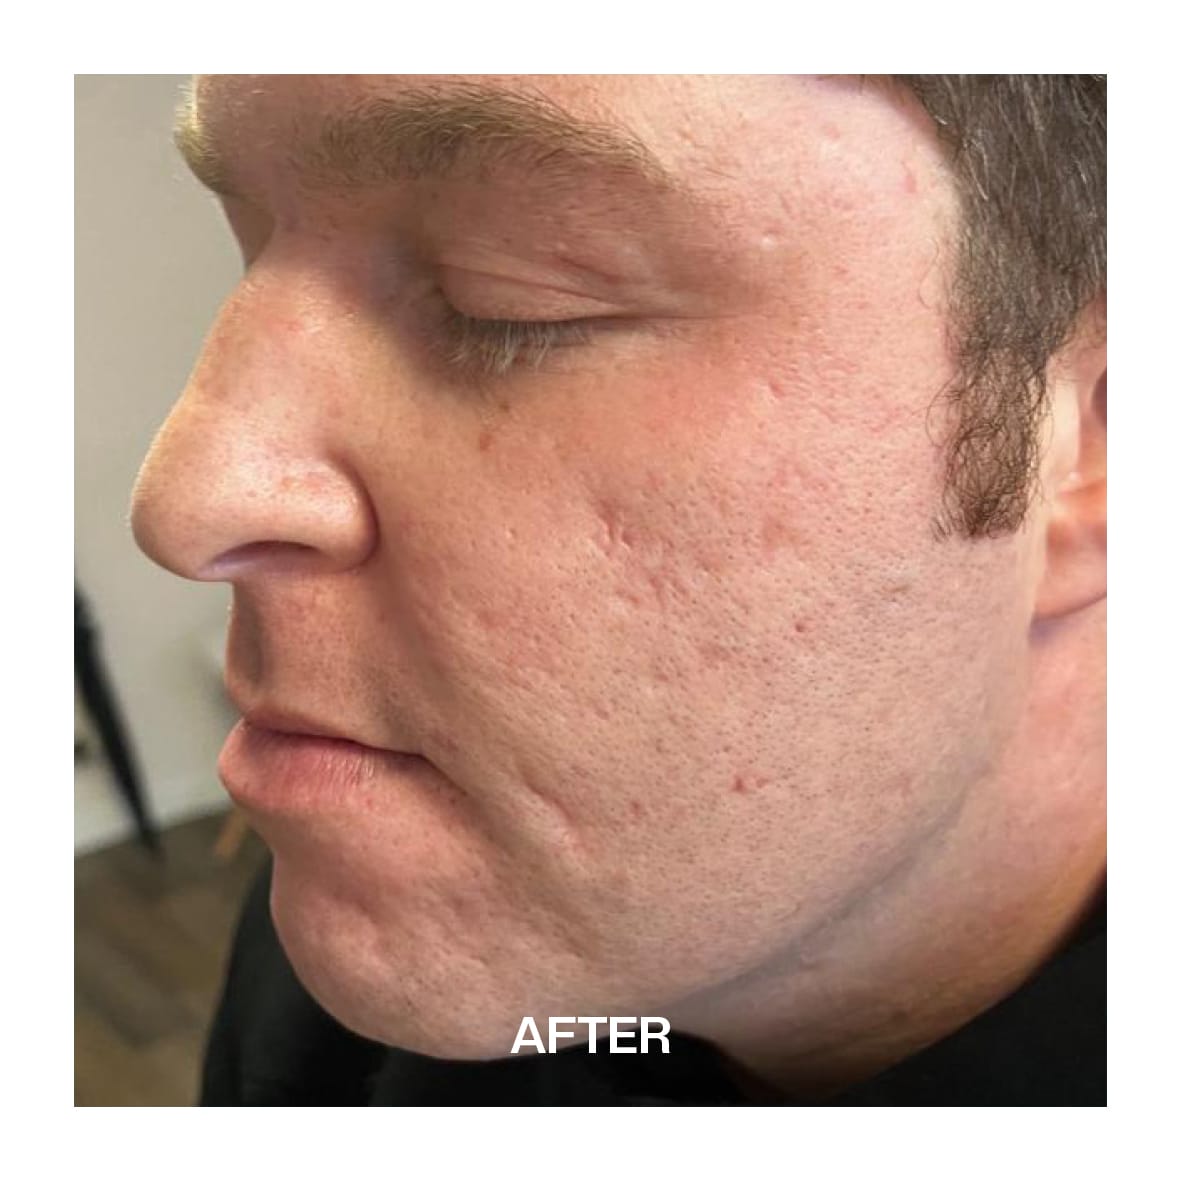 acne scar after image man